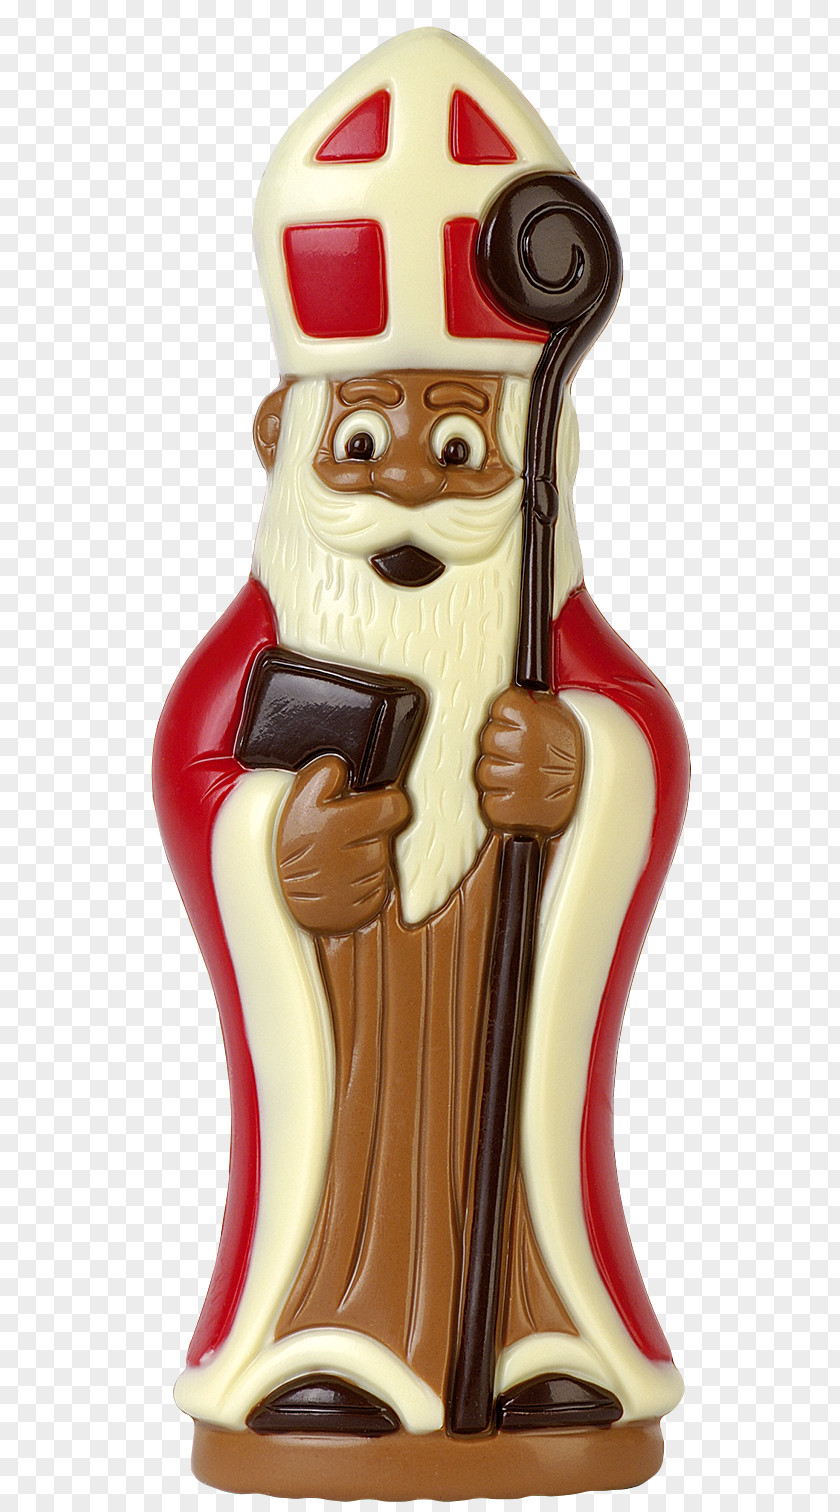 Budweiser Products In Kind Christmas Ornament Figurine Character PNG